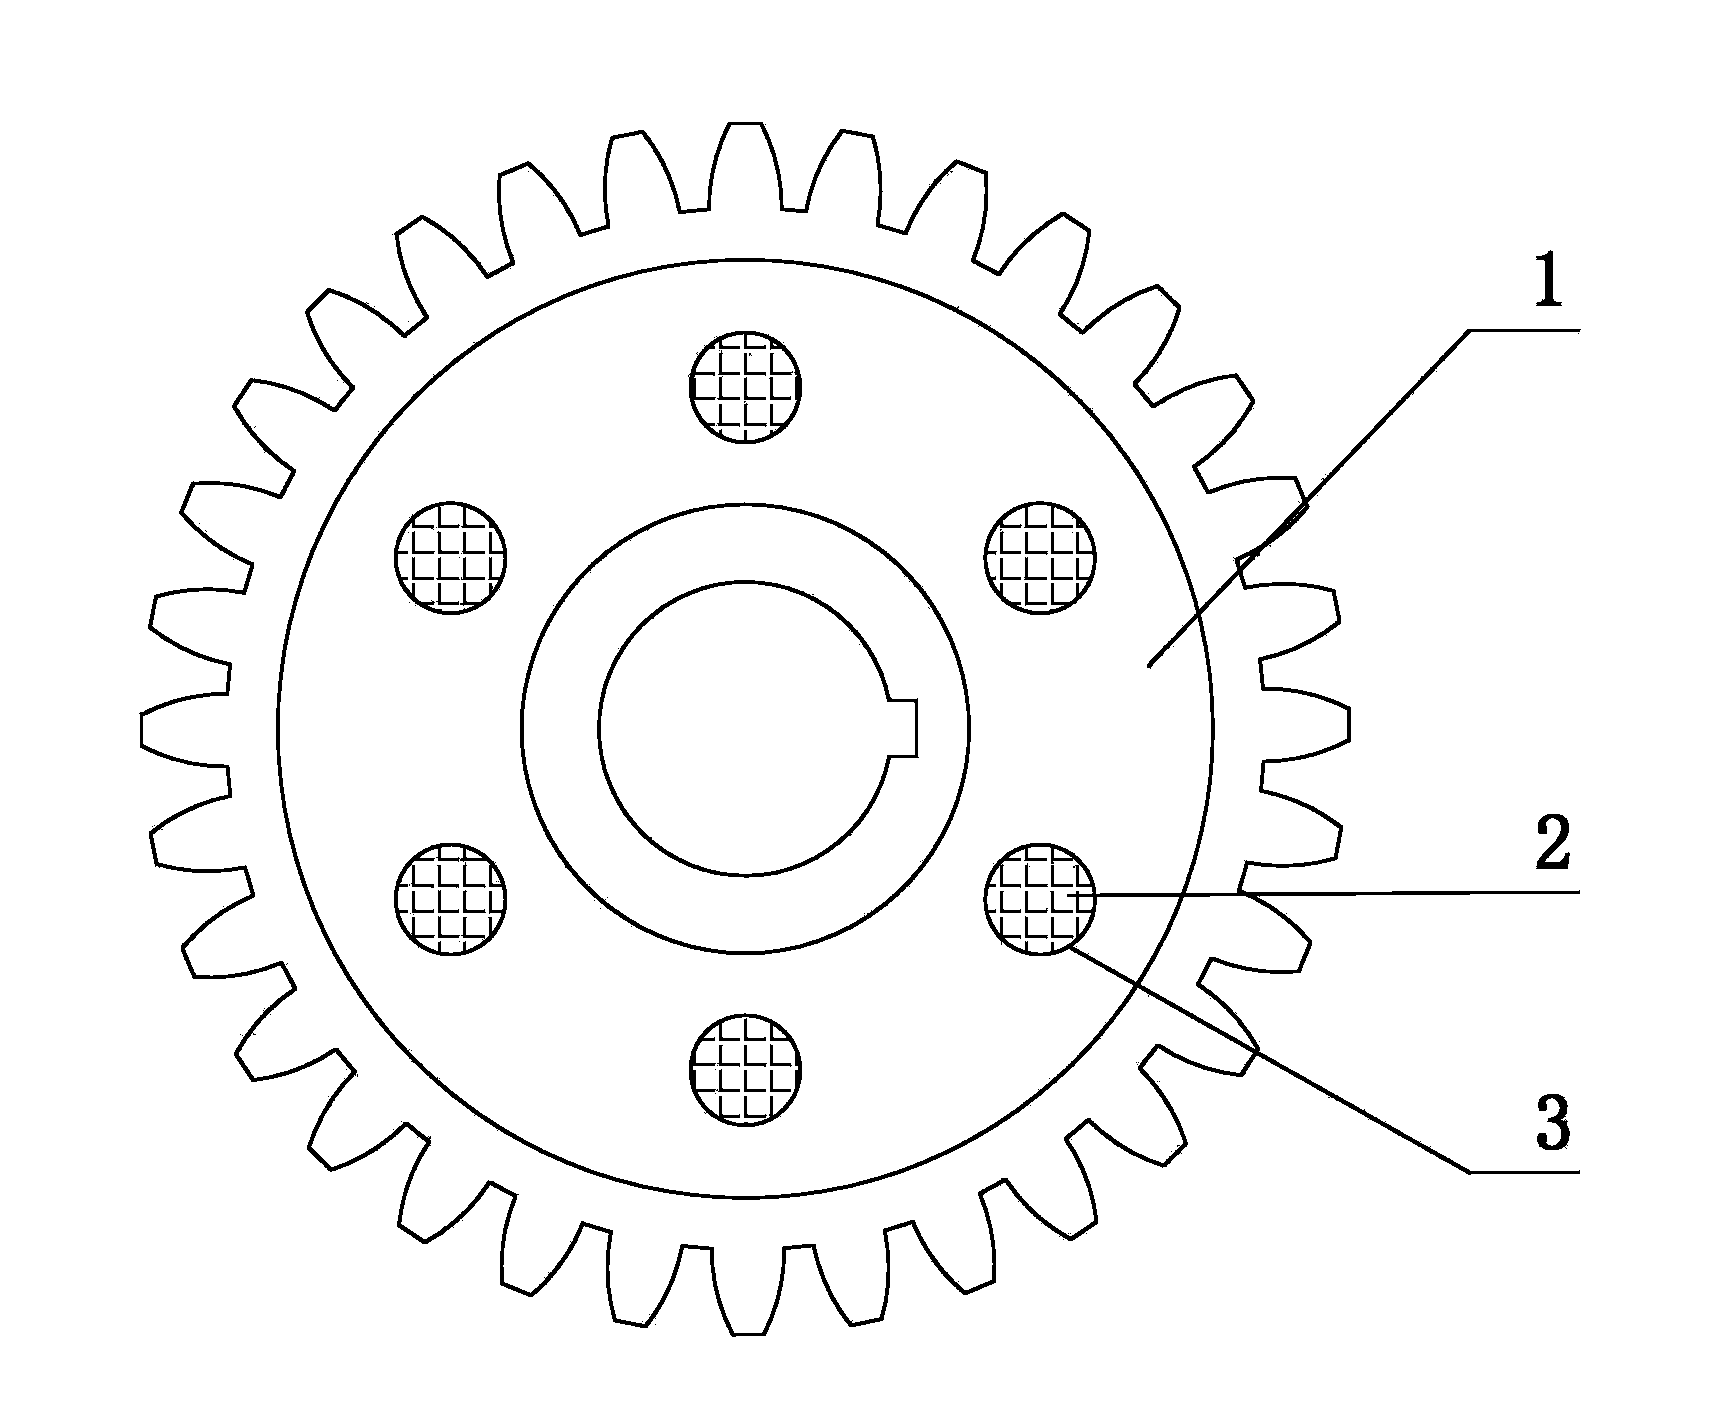 Noise-reducing gear